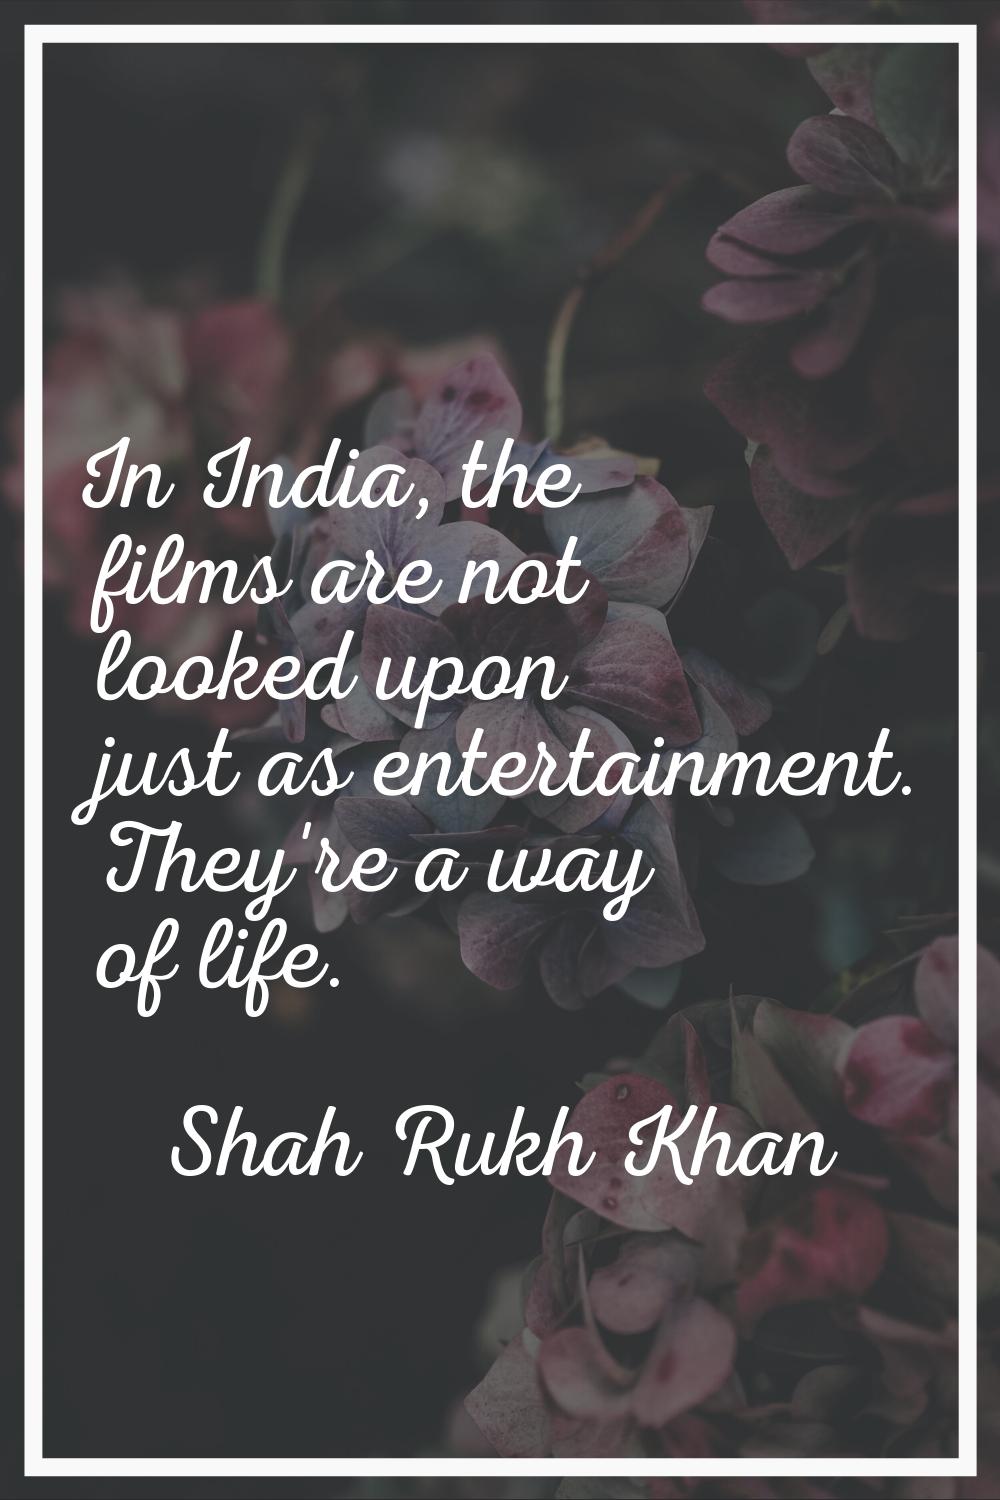 In India, the films are not looked upon just as entertainment. They're a way of life.